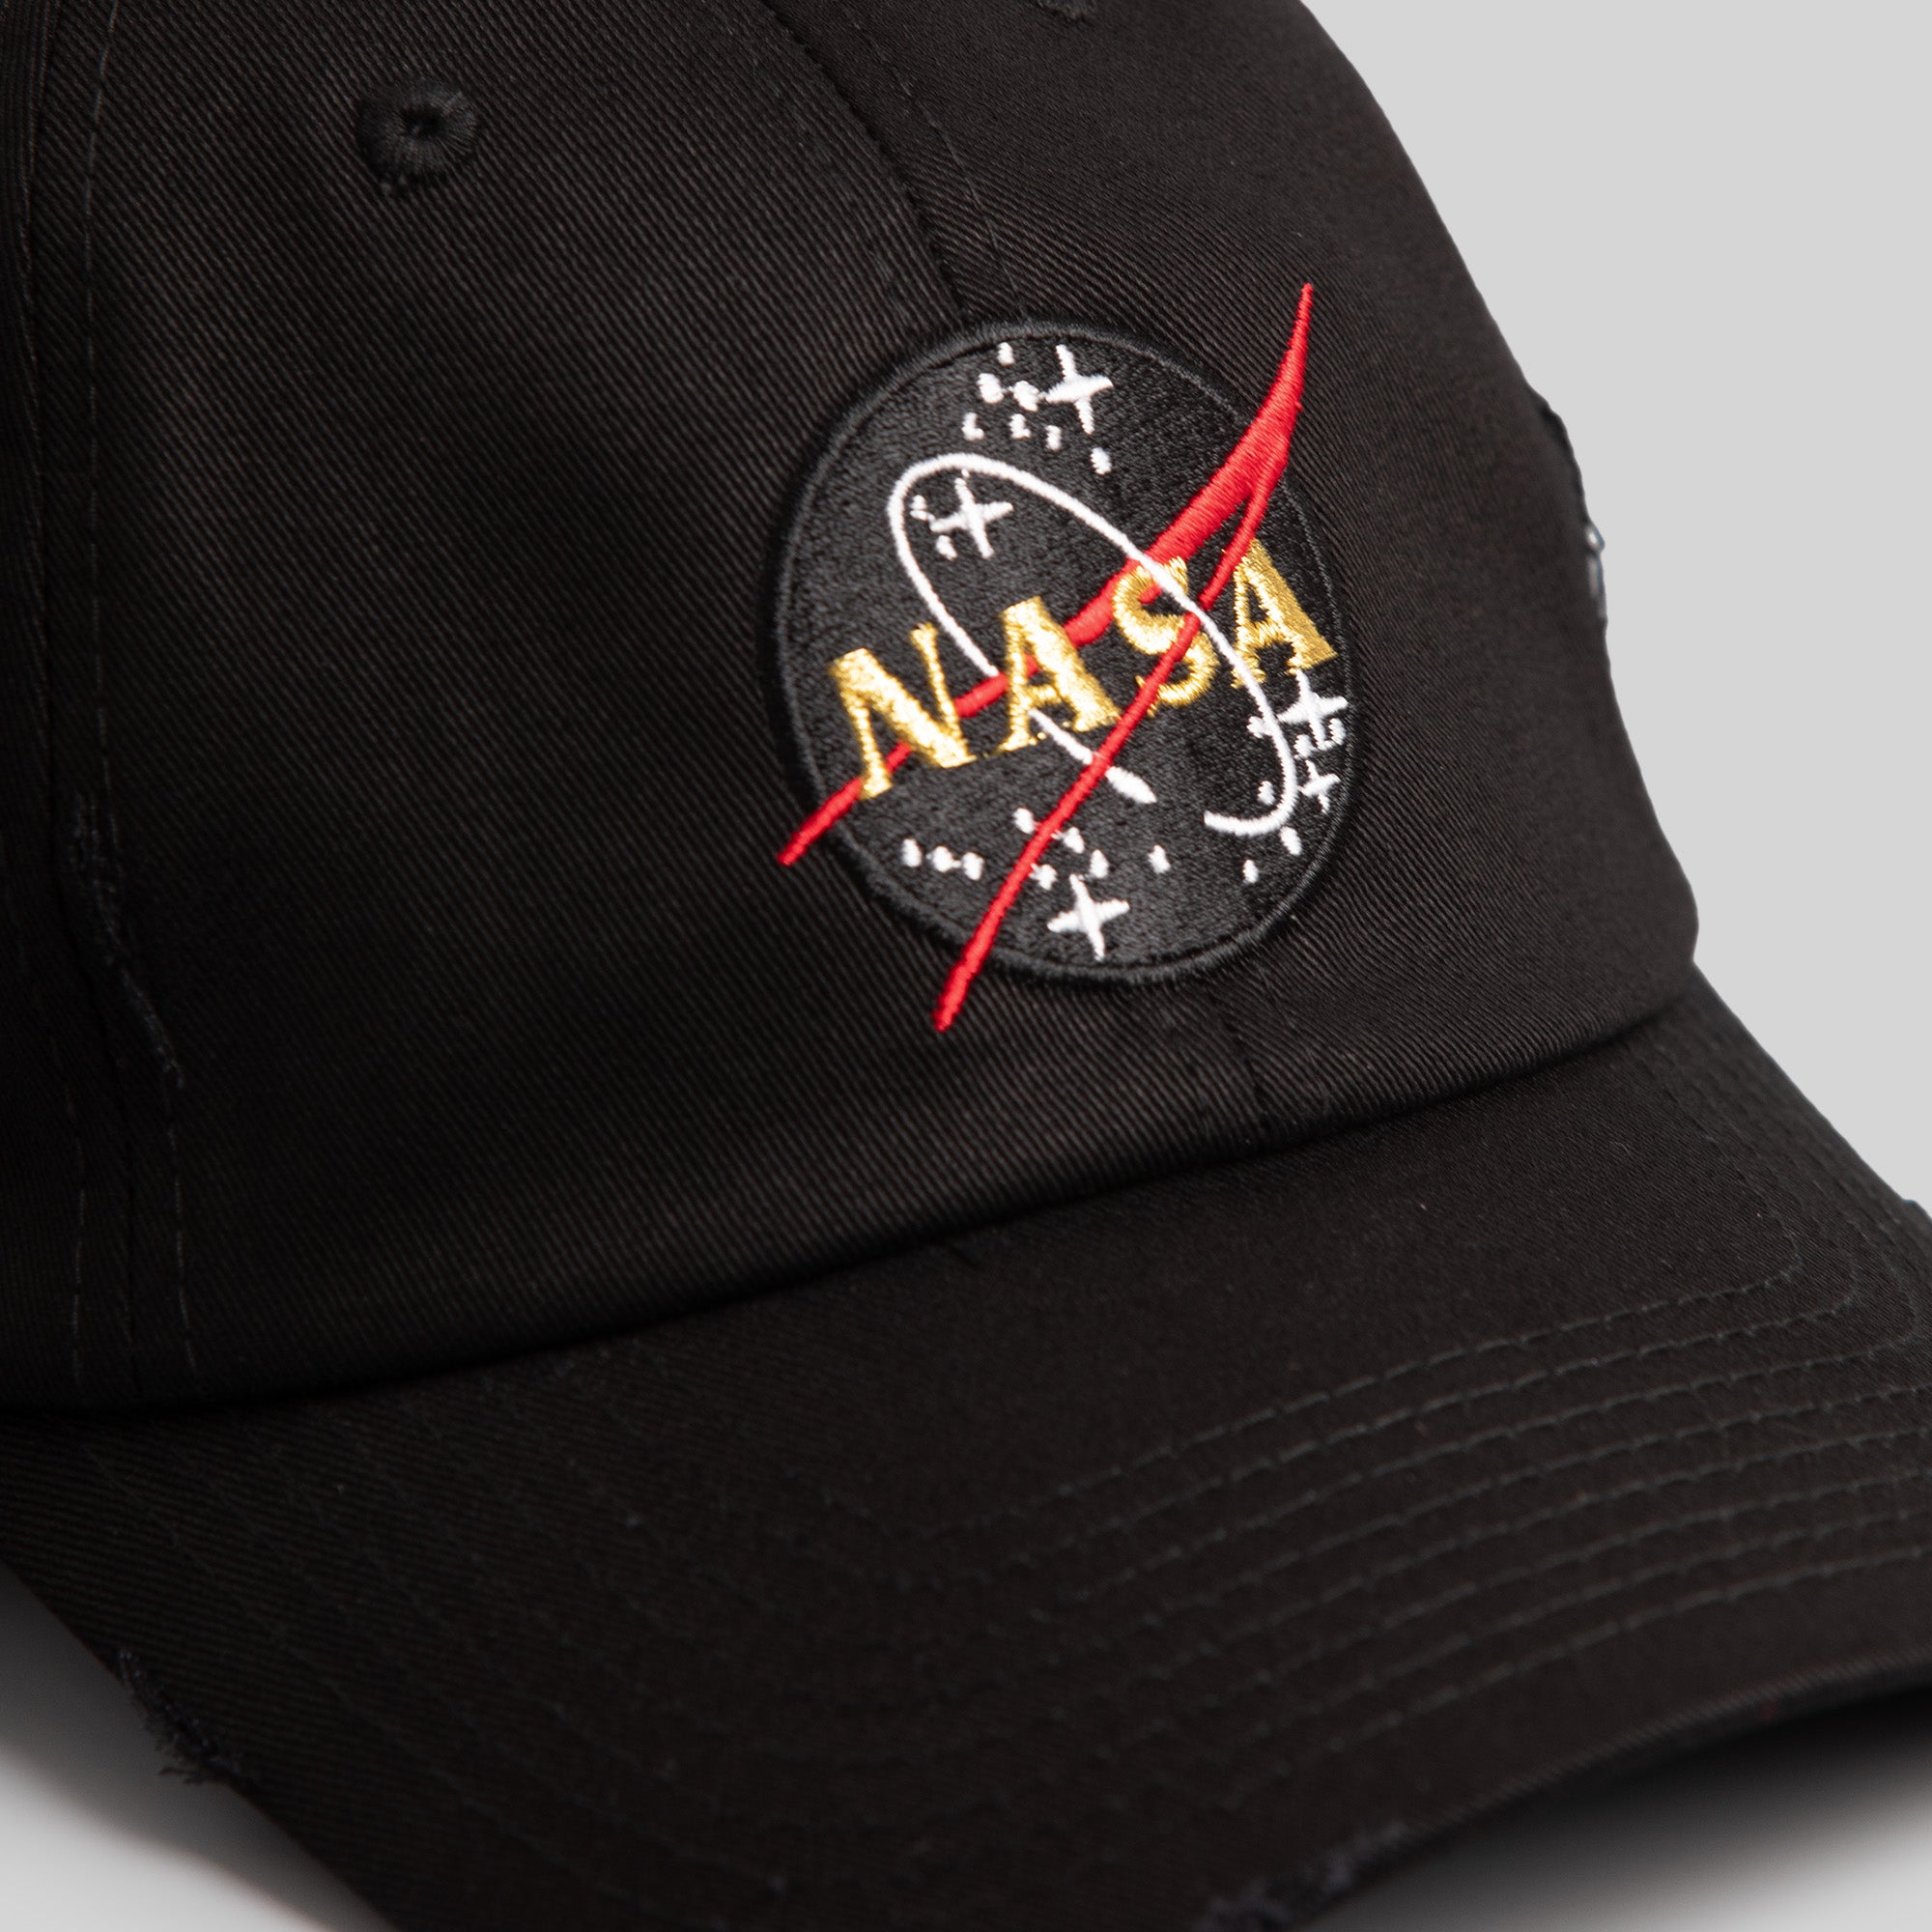 SKYLAB NASA 50TH ANNIVERSARY BLACK DISTRESSED RELAXED FIT HAT